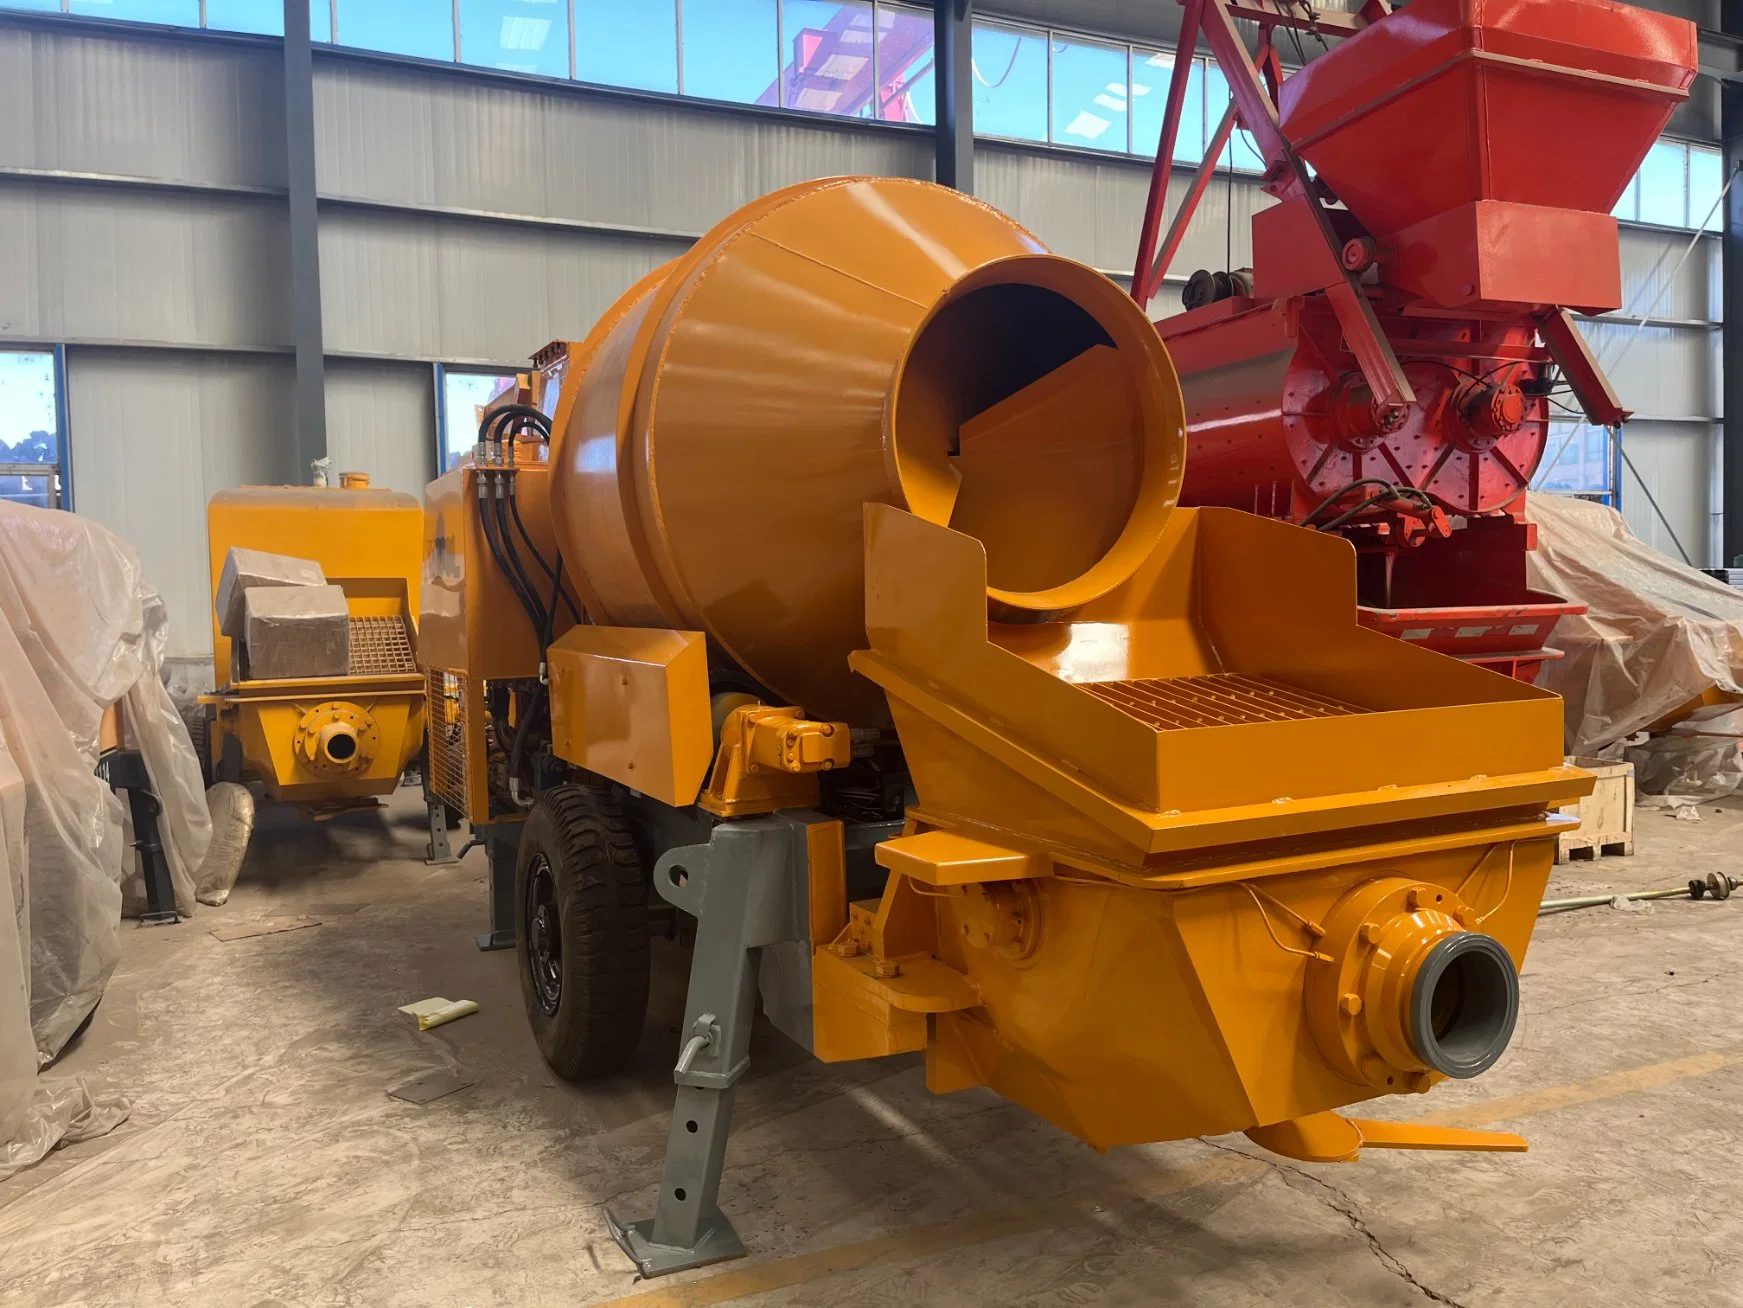 High Efficiency Mini Concrete Mixer and Pump Machine for Mixing and Pumping with Diesel Engine Driven